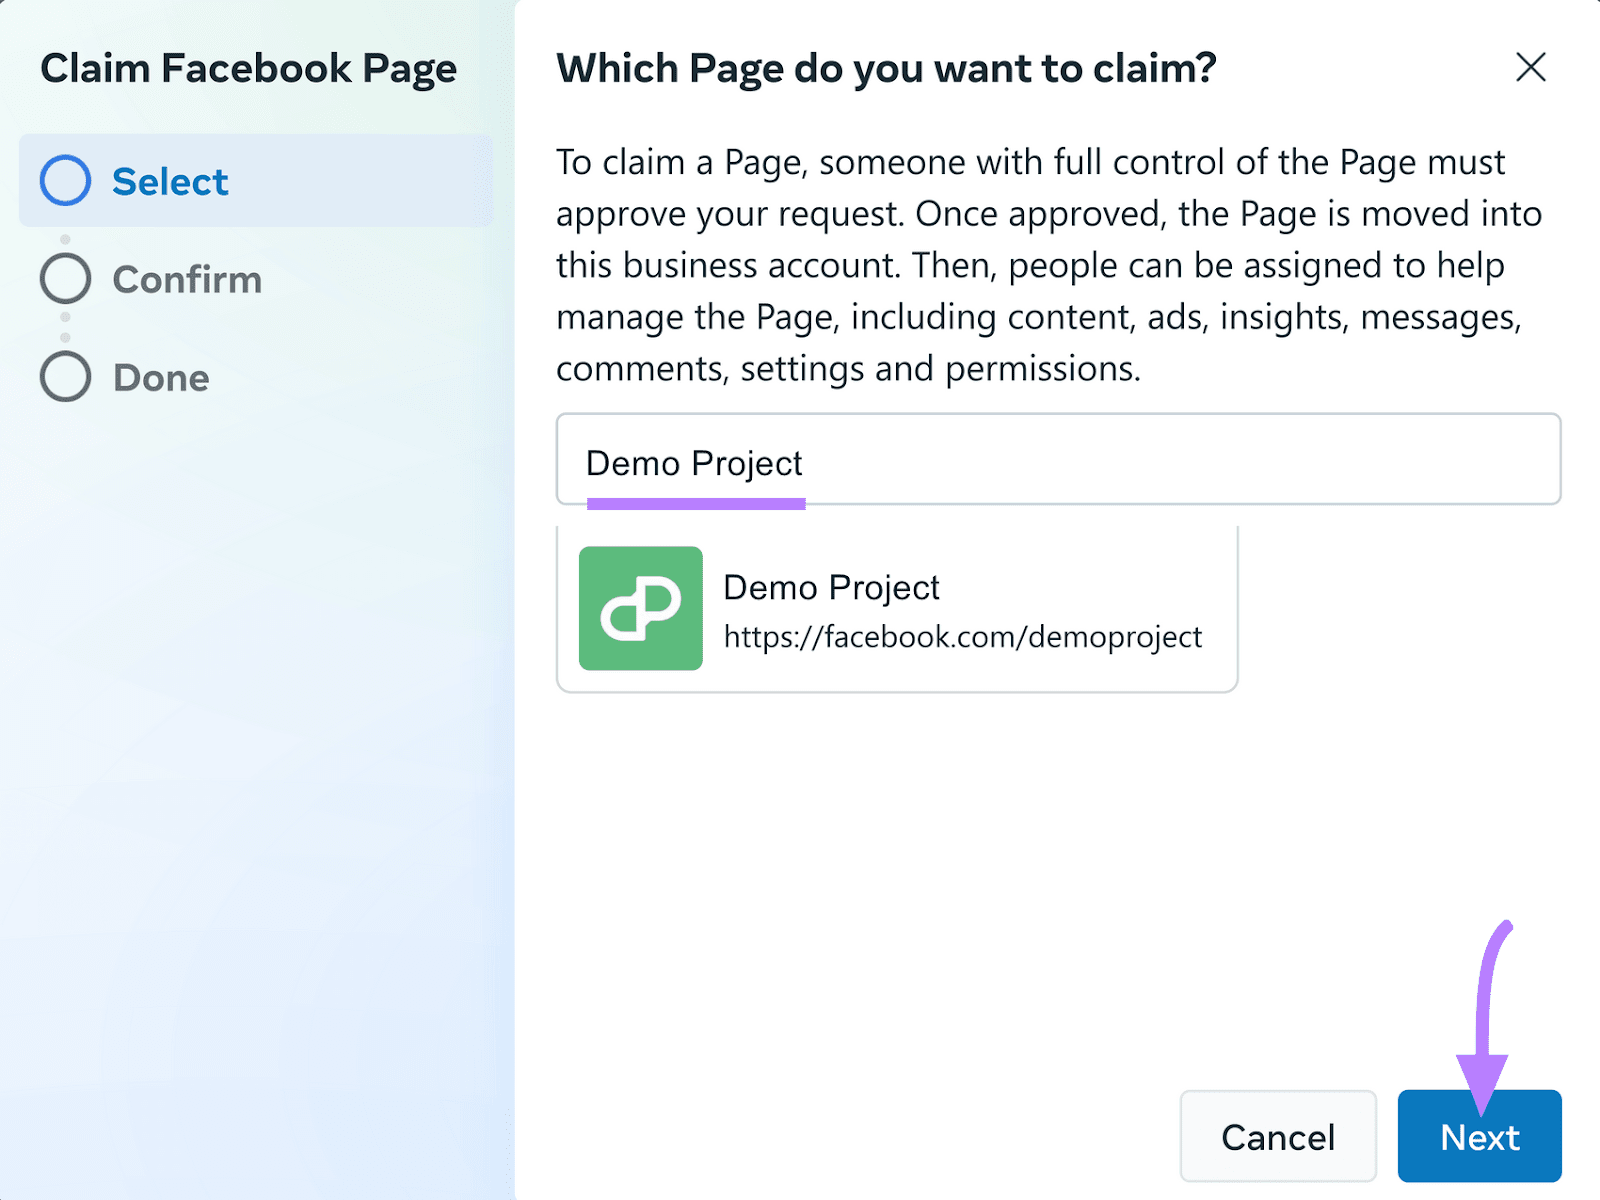 "Demo Project" selected under "Claim Facebook Page" window